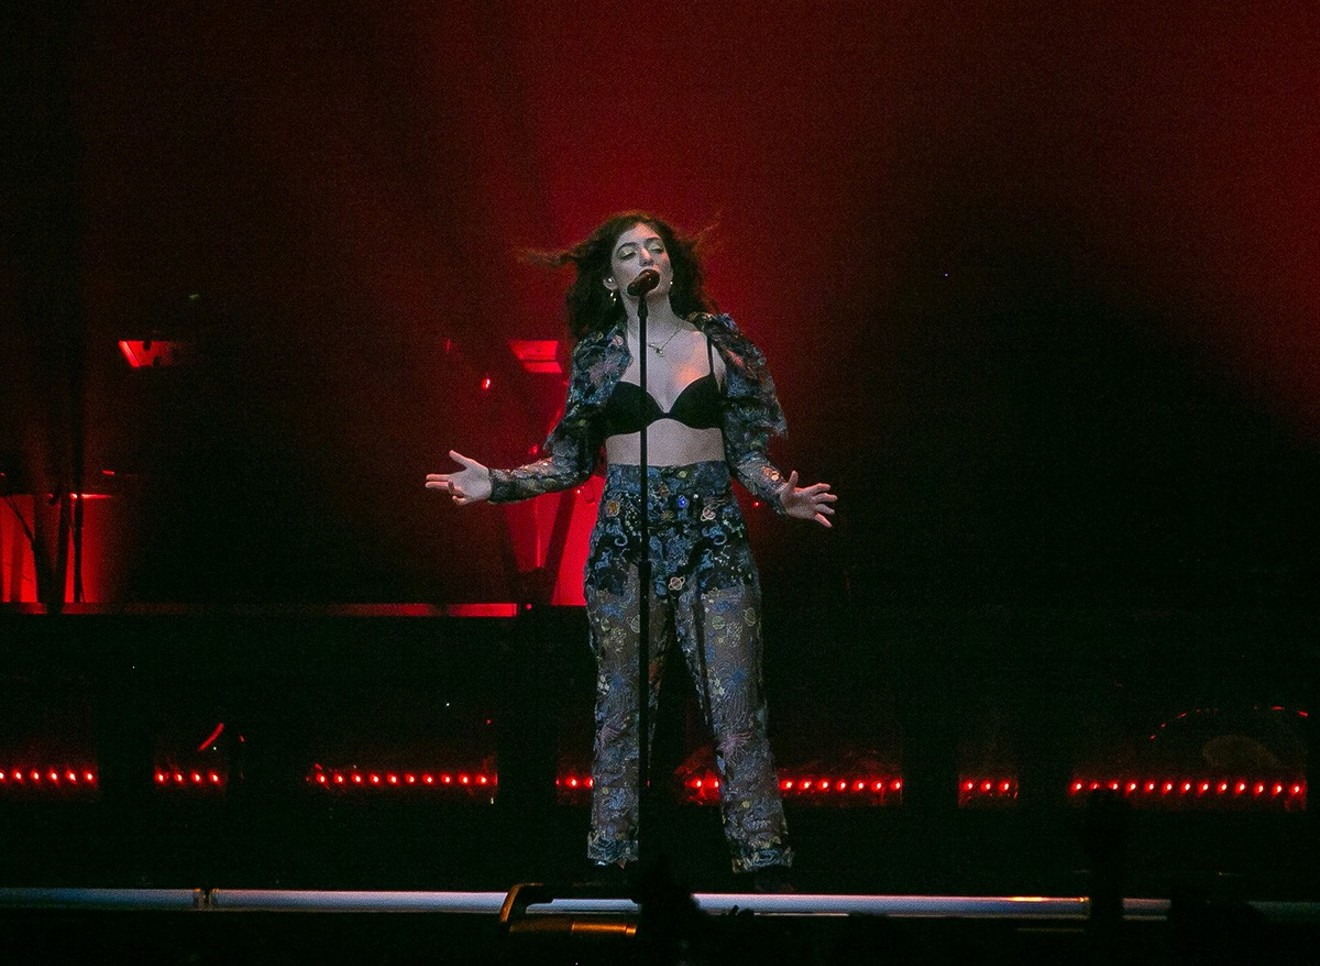 See more photos from Lorde's show here.